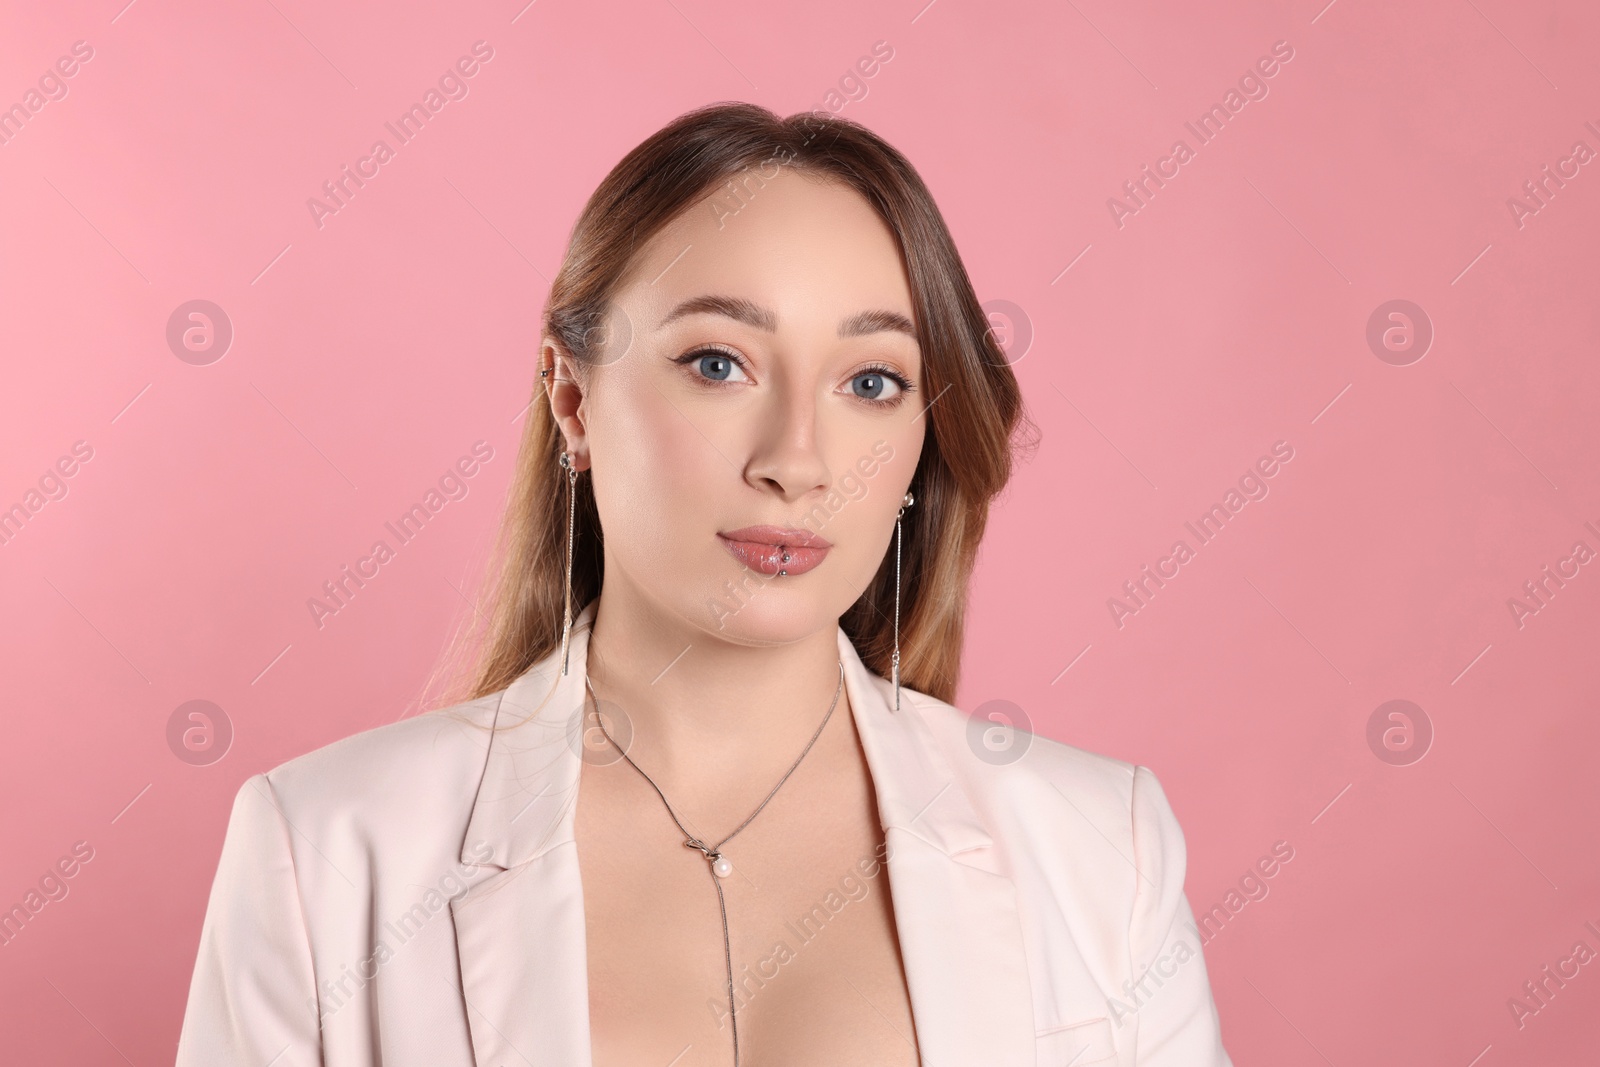 Photo of Young woman with lip and ear piercings on pink background